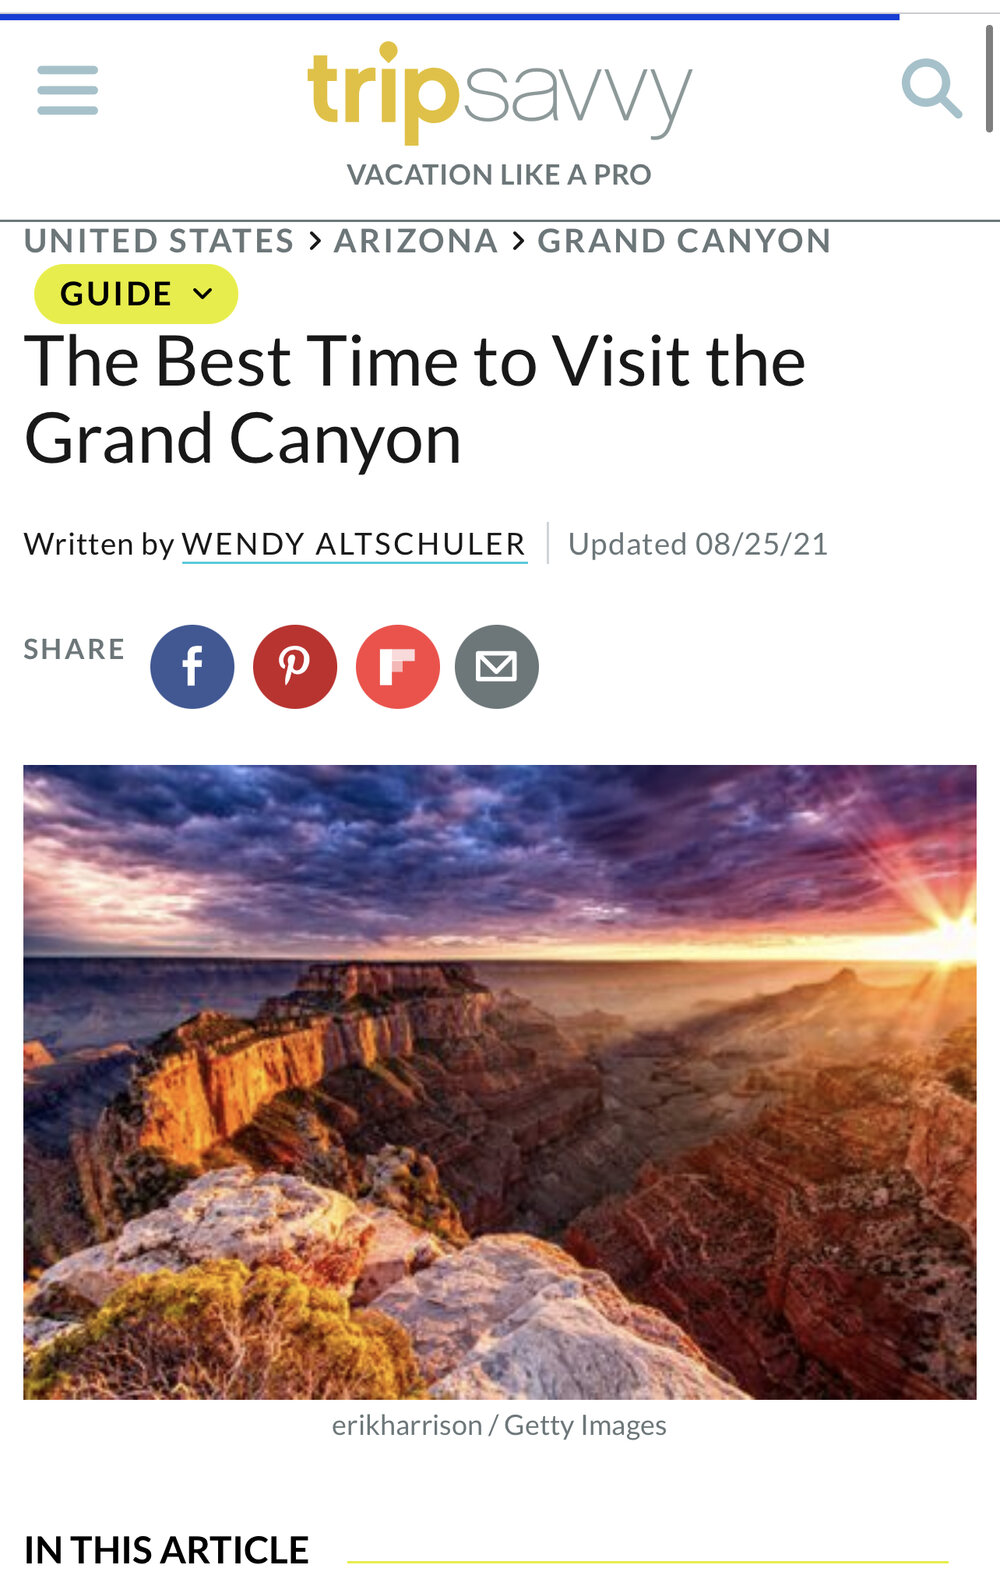 The Best Time to Visit the Grand Canyon